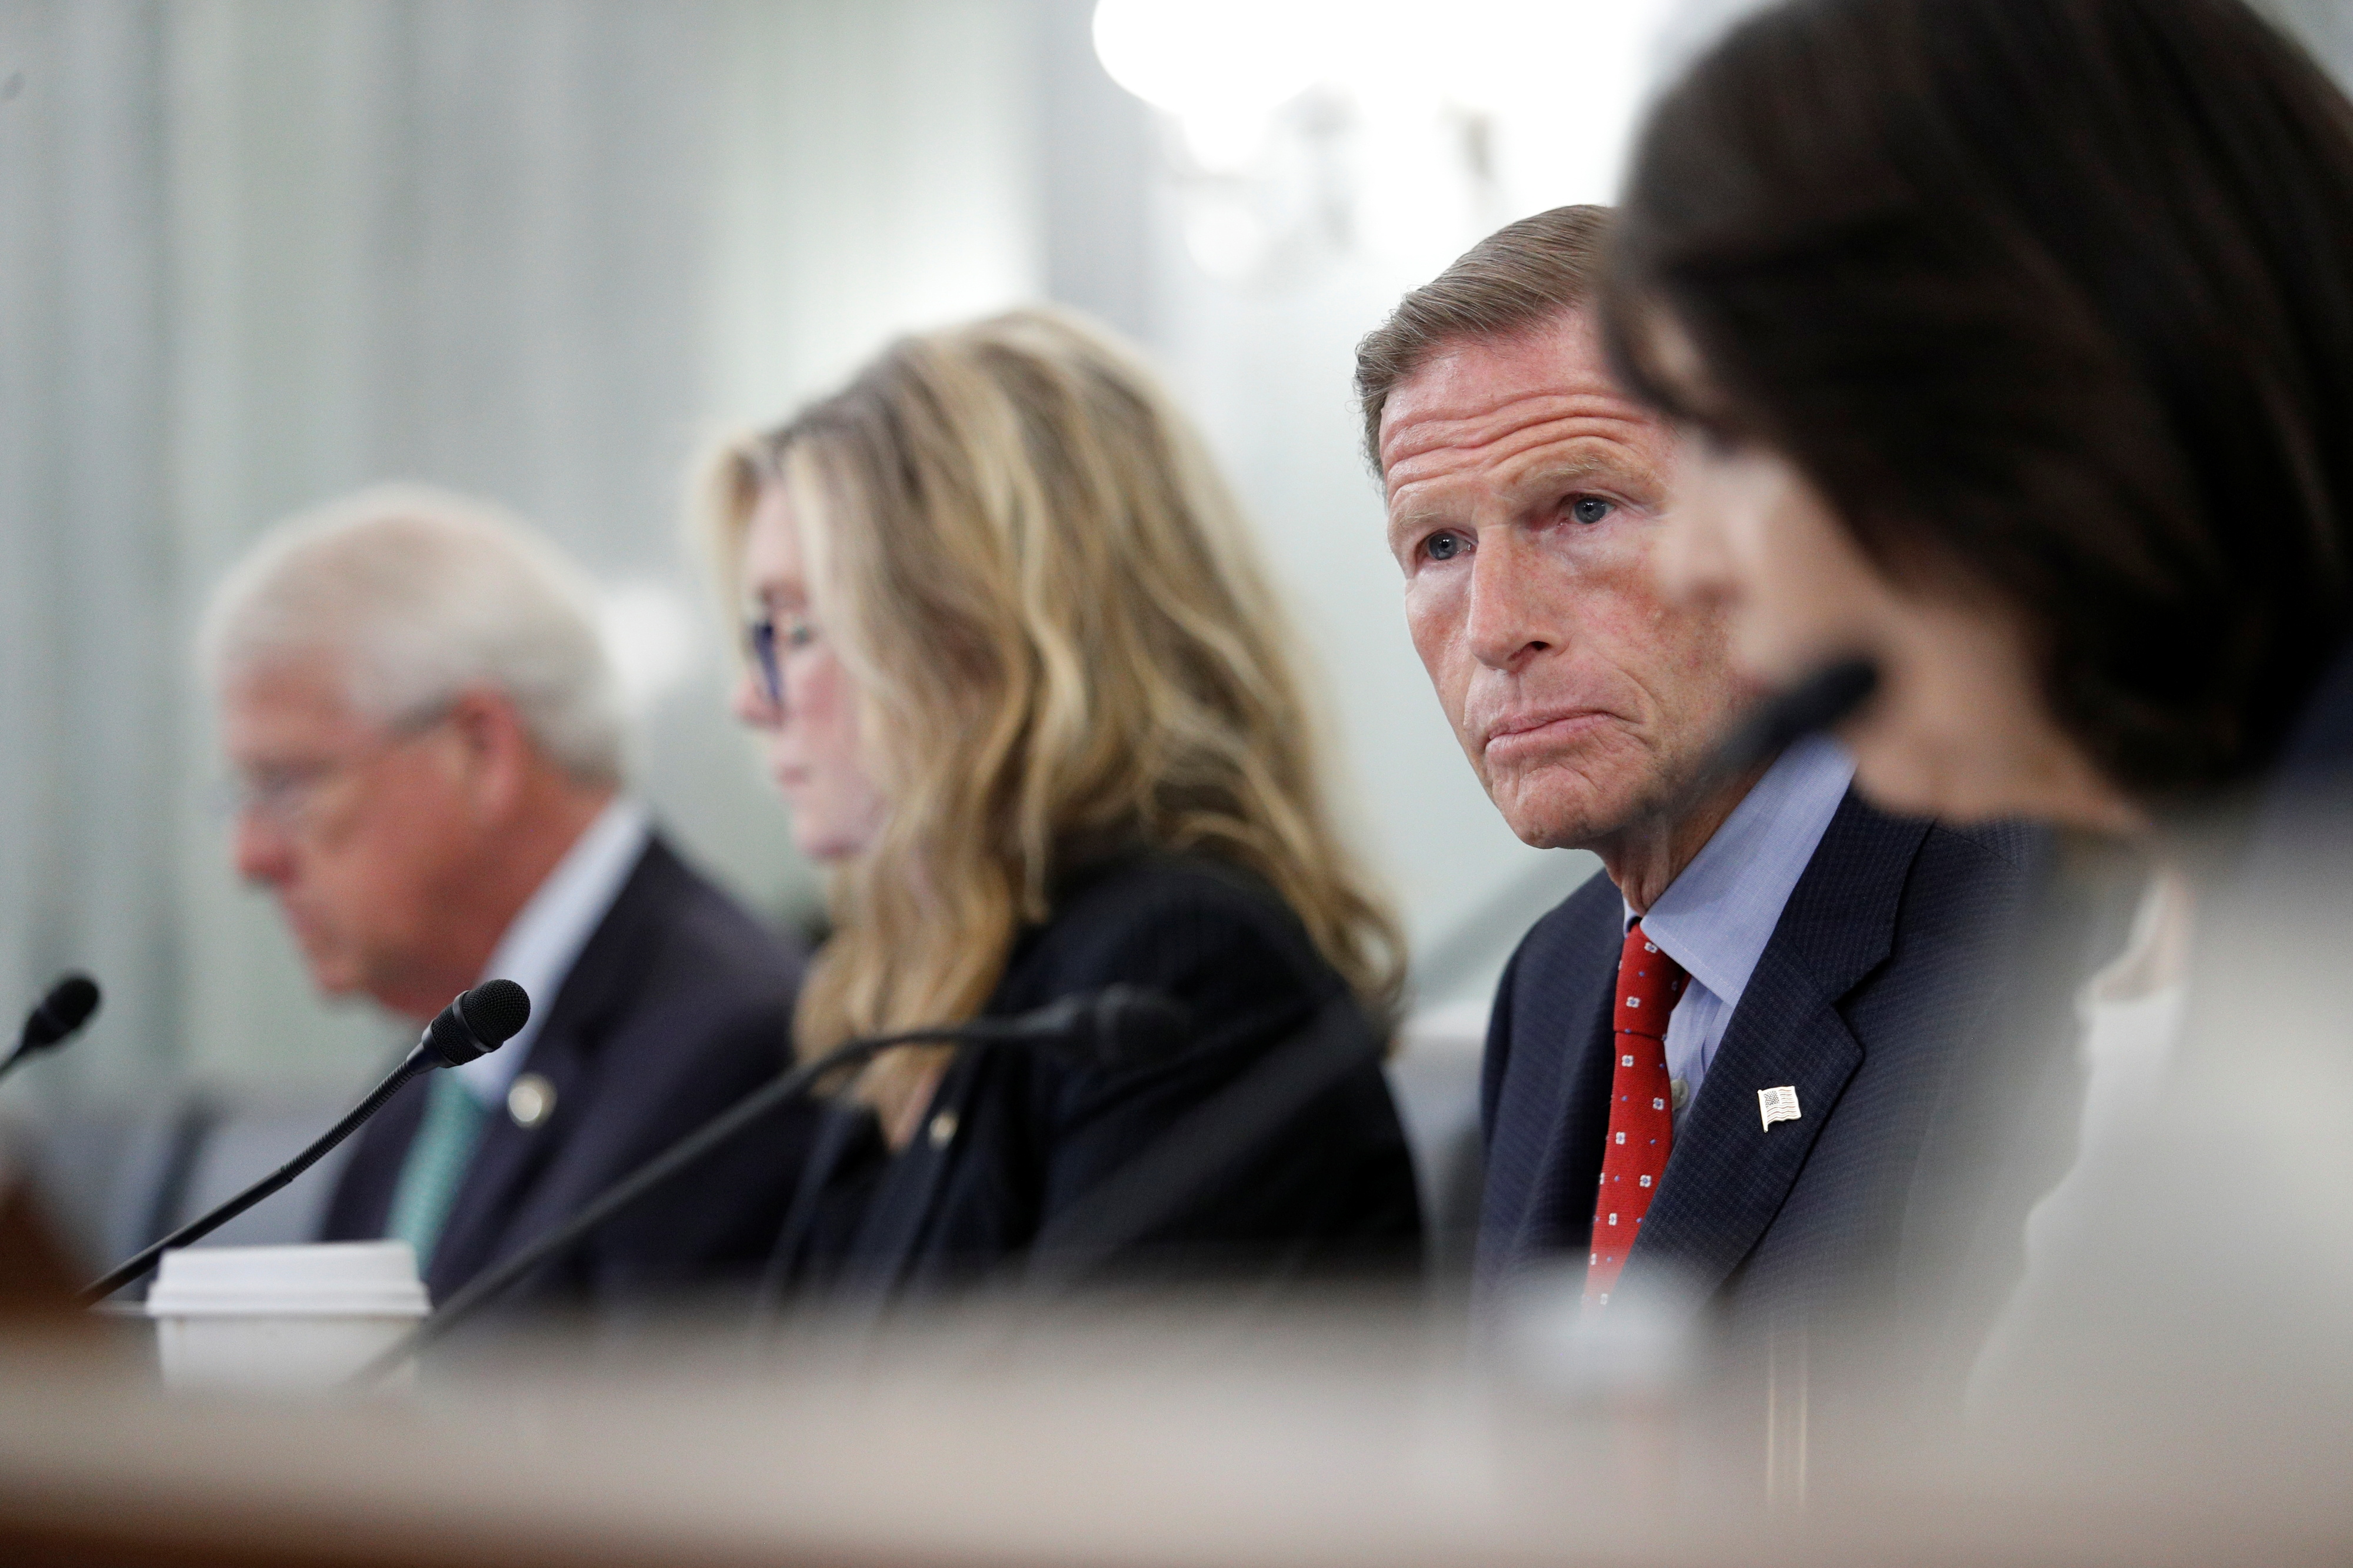 Senator Richard Blumenthal (D-CT) looks on as Antigone Davis, Director of the Global Head of Safety at Facebook (not pictured) testifies before the Senate Commerce, Science, and Transportation - Subcommittee on Consumer Protection, Product Safety, and Data Security, on Capitol Hill in Washington, DC, U.S., September 30, 2021.  Tom Brenner/Pool via REUTERS